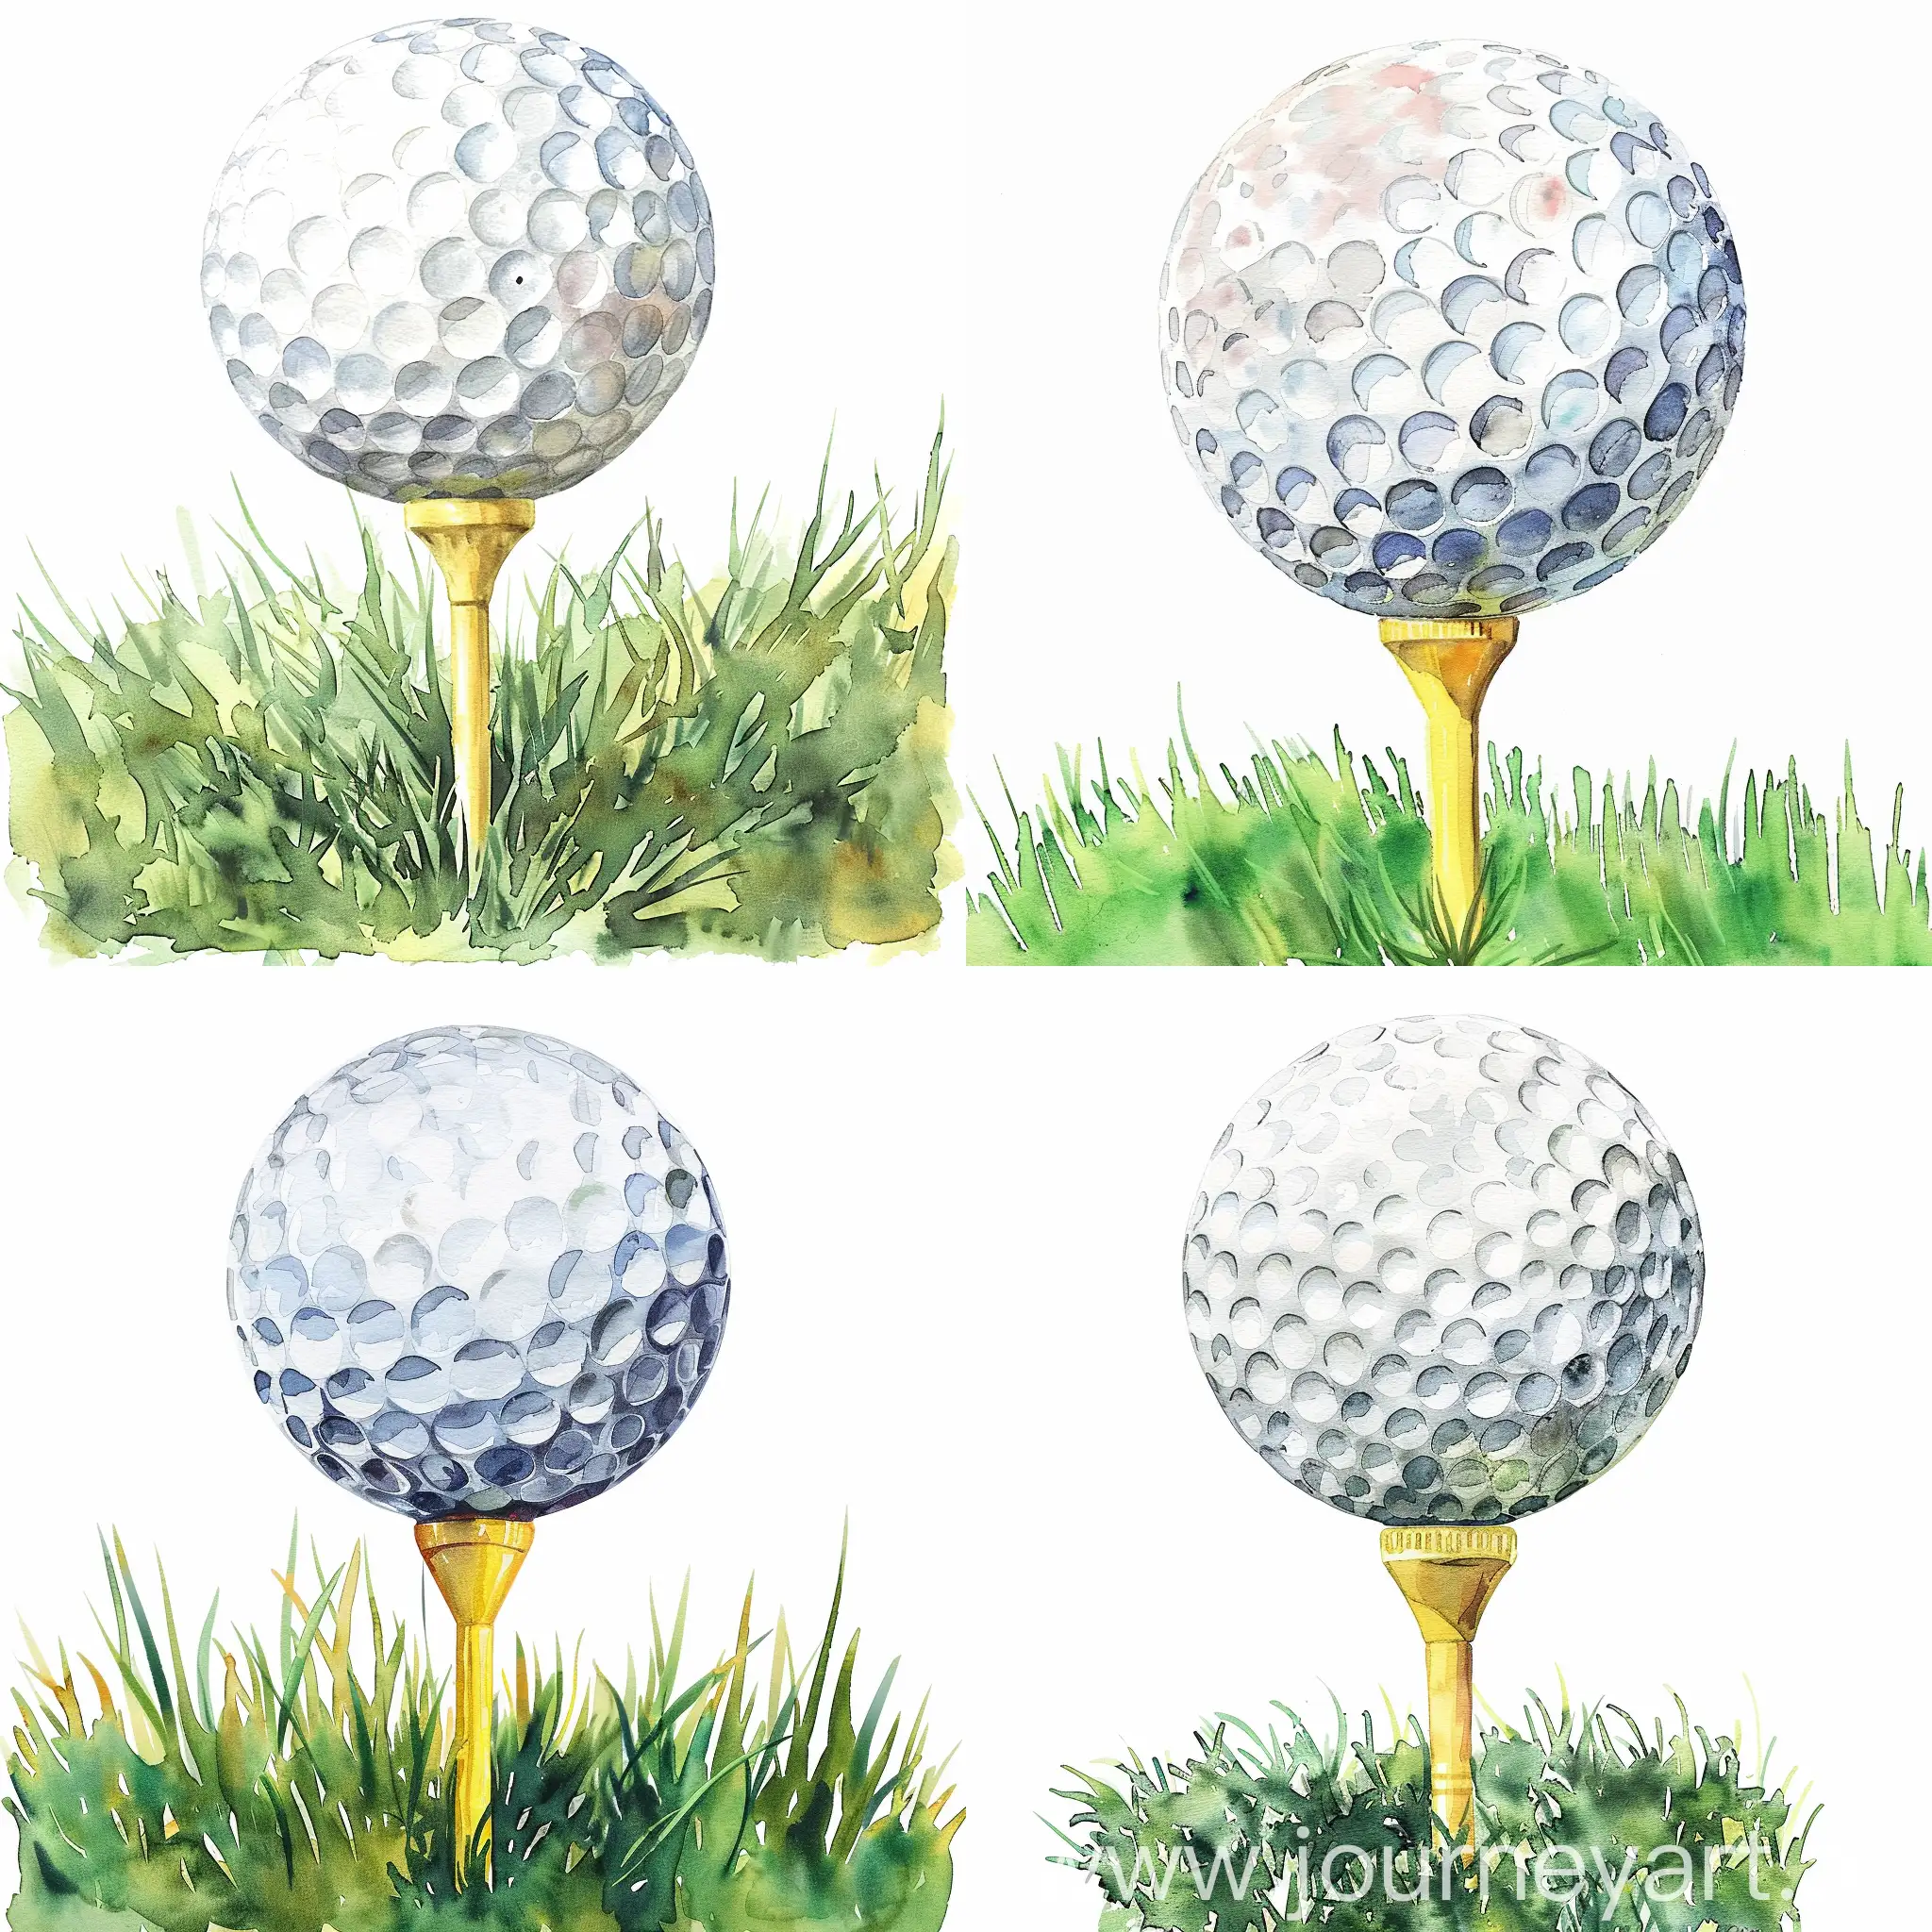 Golf Ball on Tee: A large white golf ball with small round dimples is perched atop a yellow tee, which is inserted into green grass. in watercolor style, on strak white background, centred and isolated from background